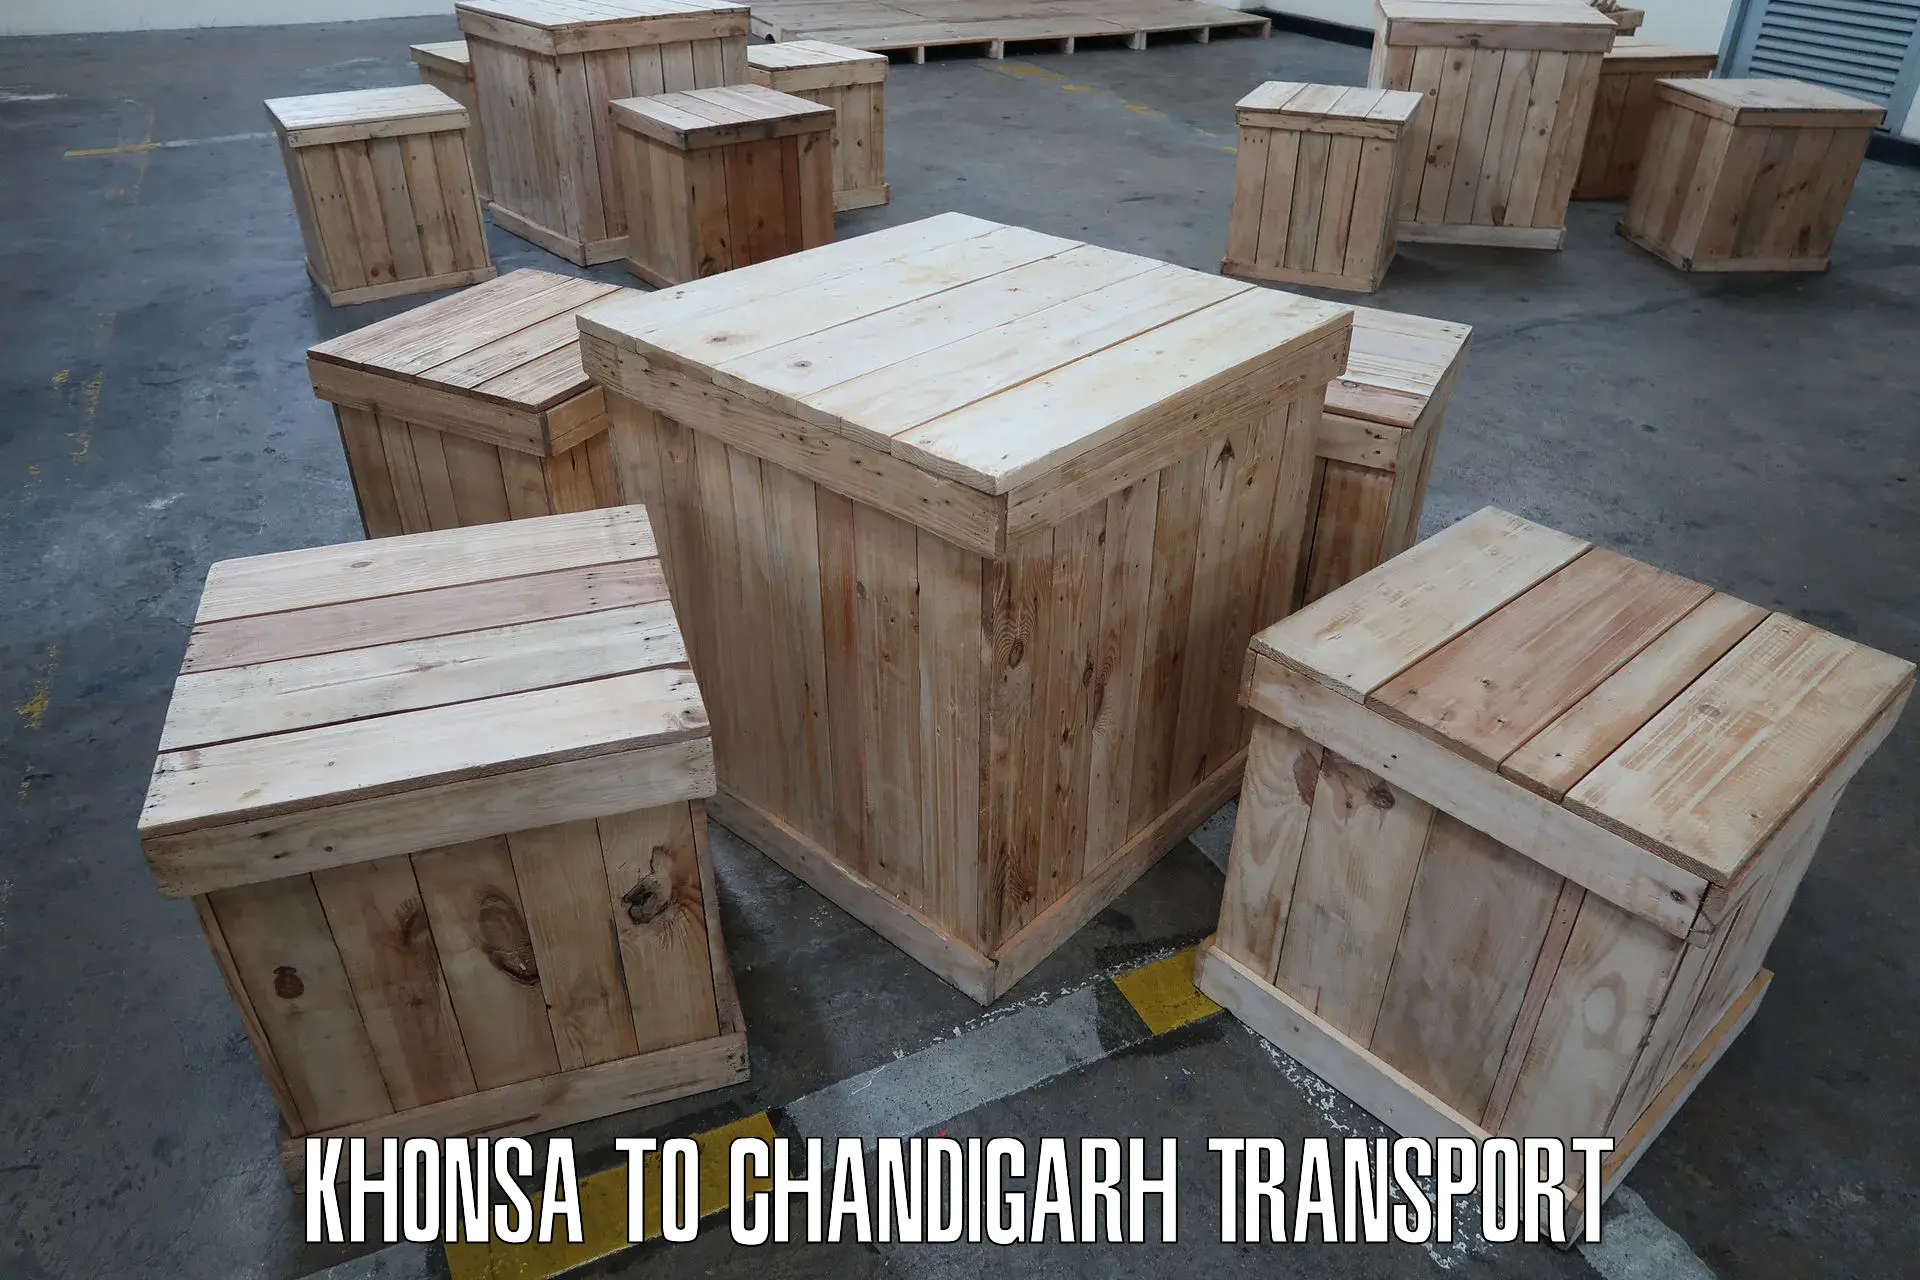 Container transport service Khonsa to Chandigarh